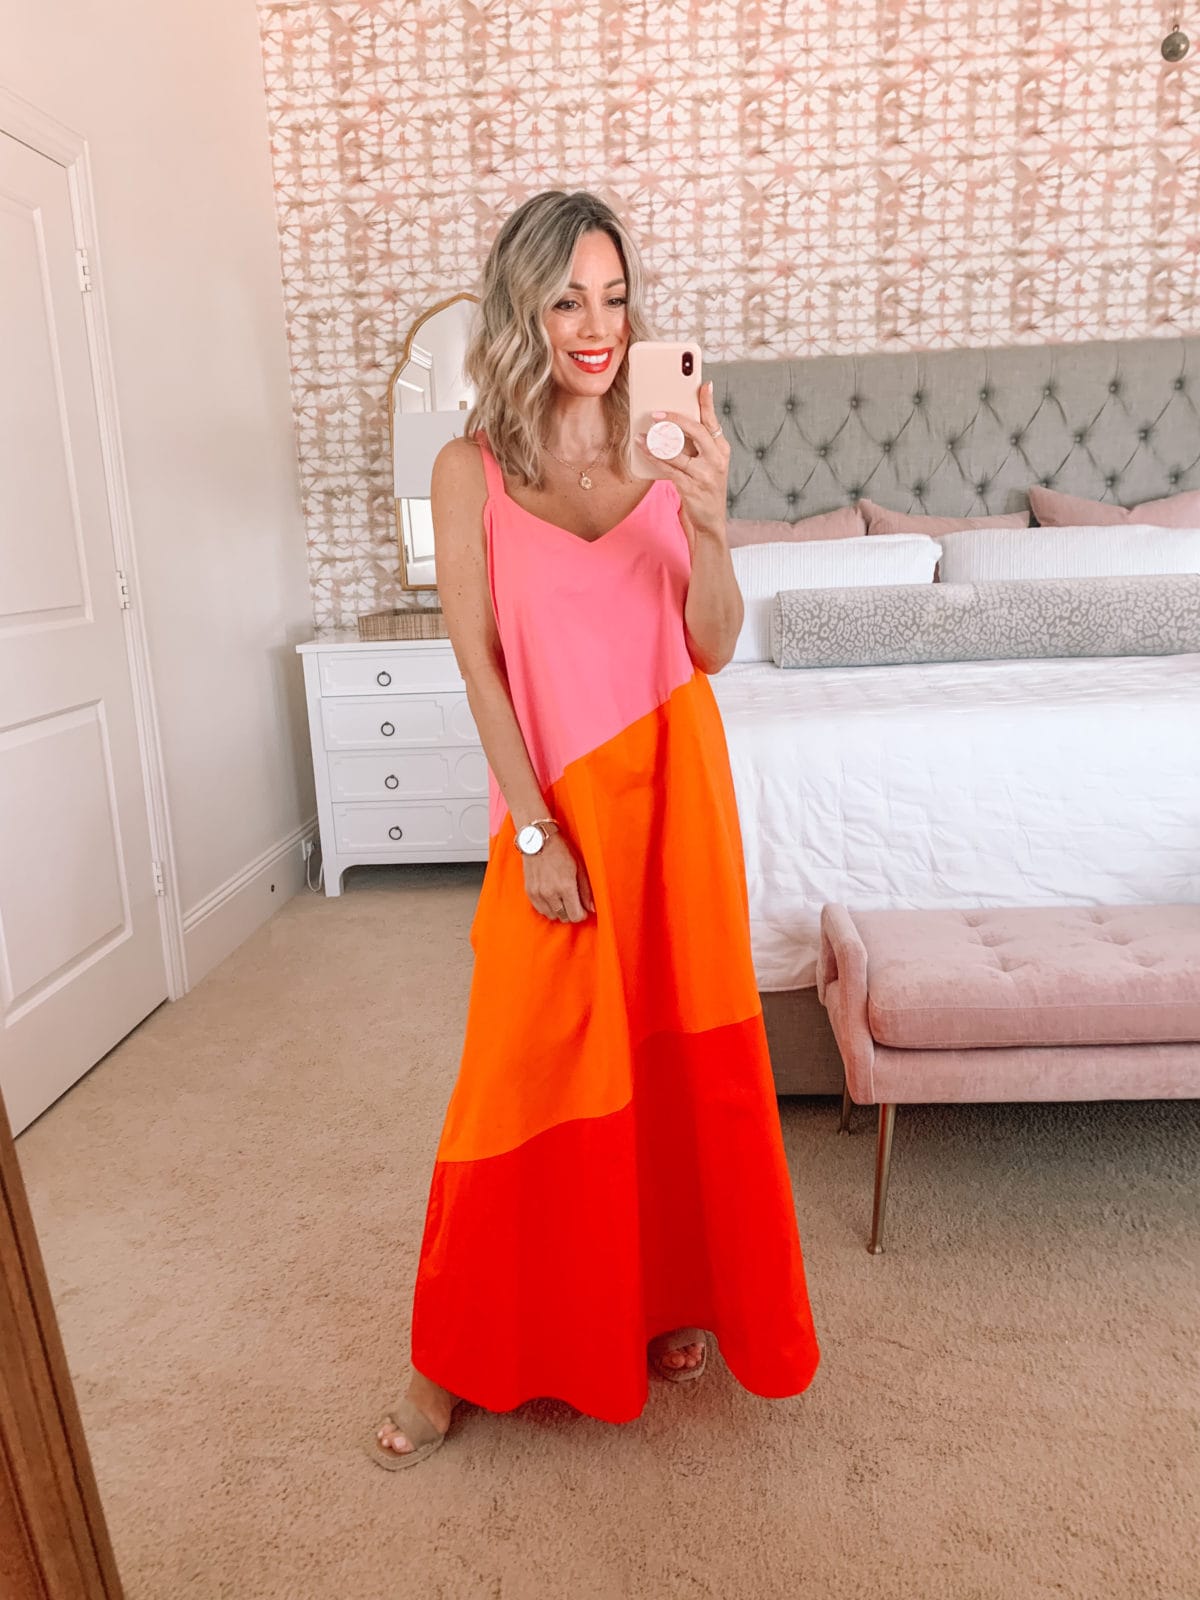 Amazon Fashion Faves, Colorblock dress in Pink, Orange, and Red, with wedges 